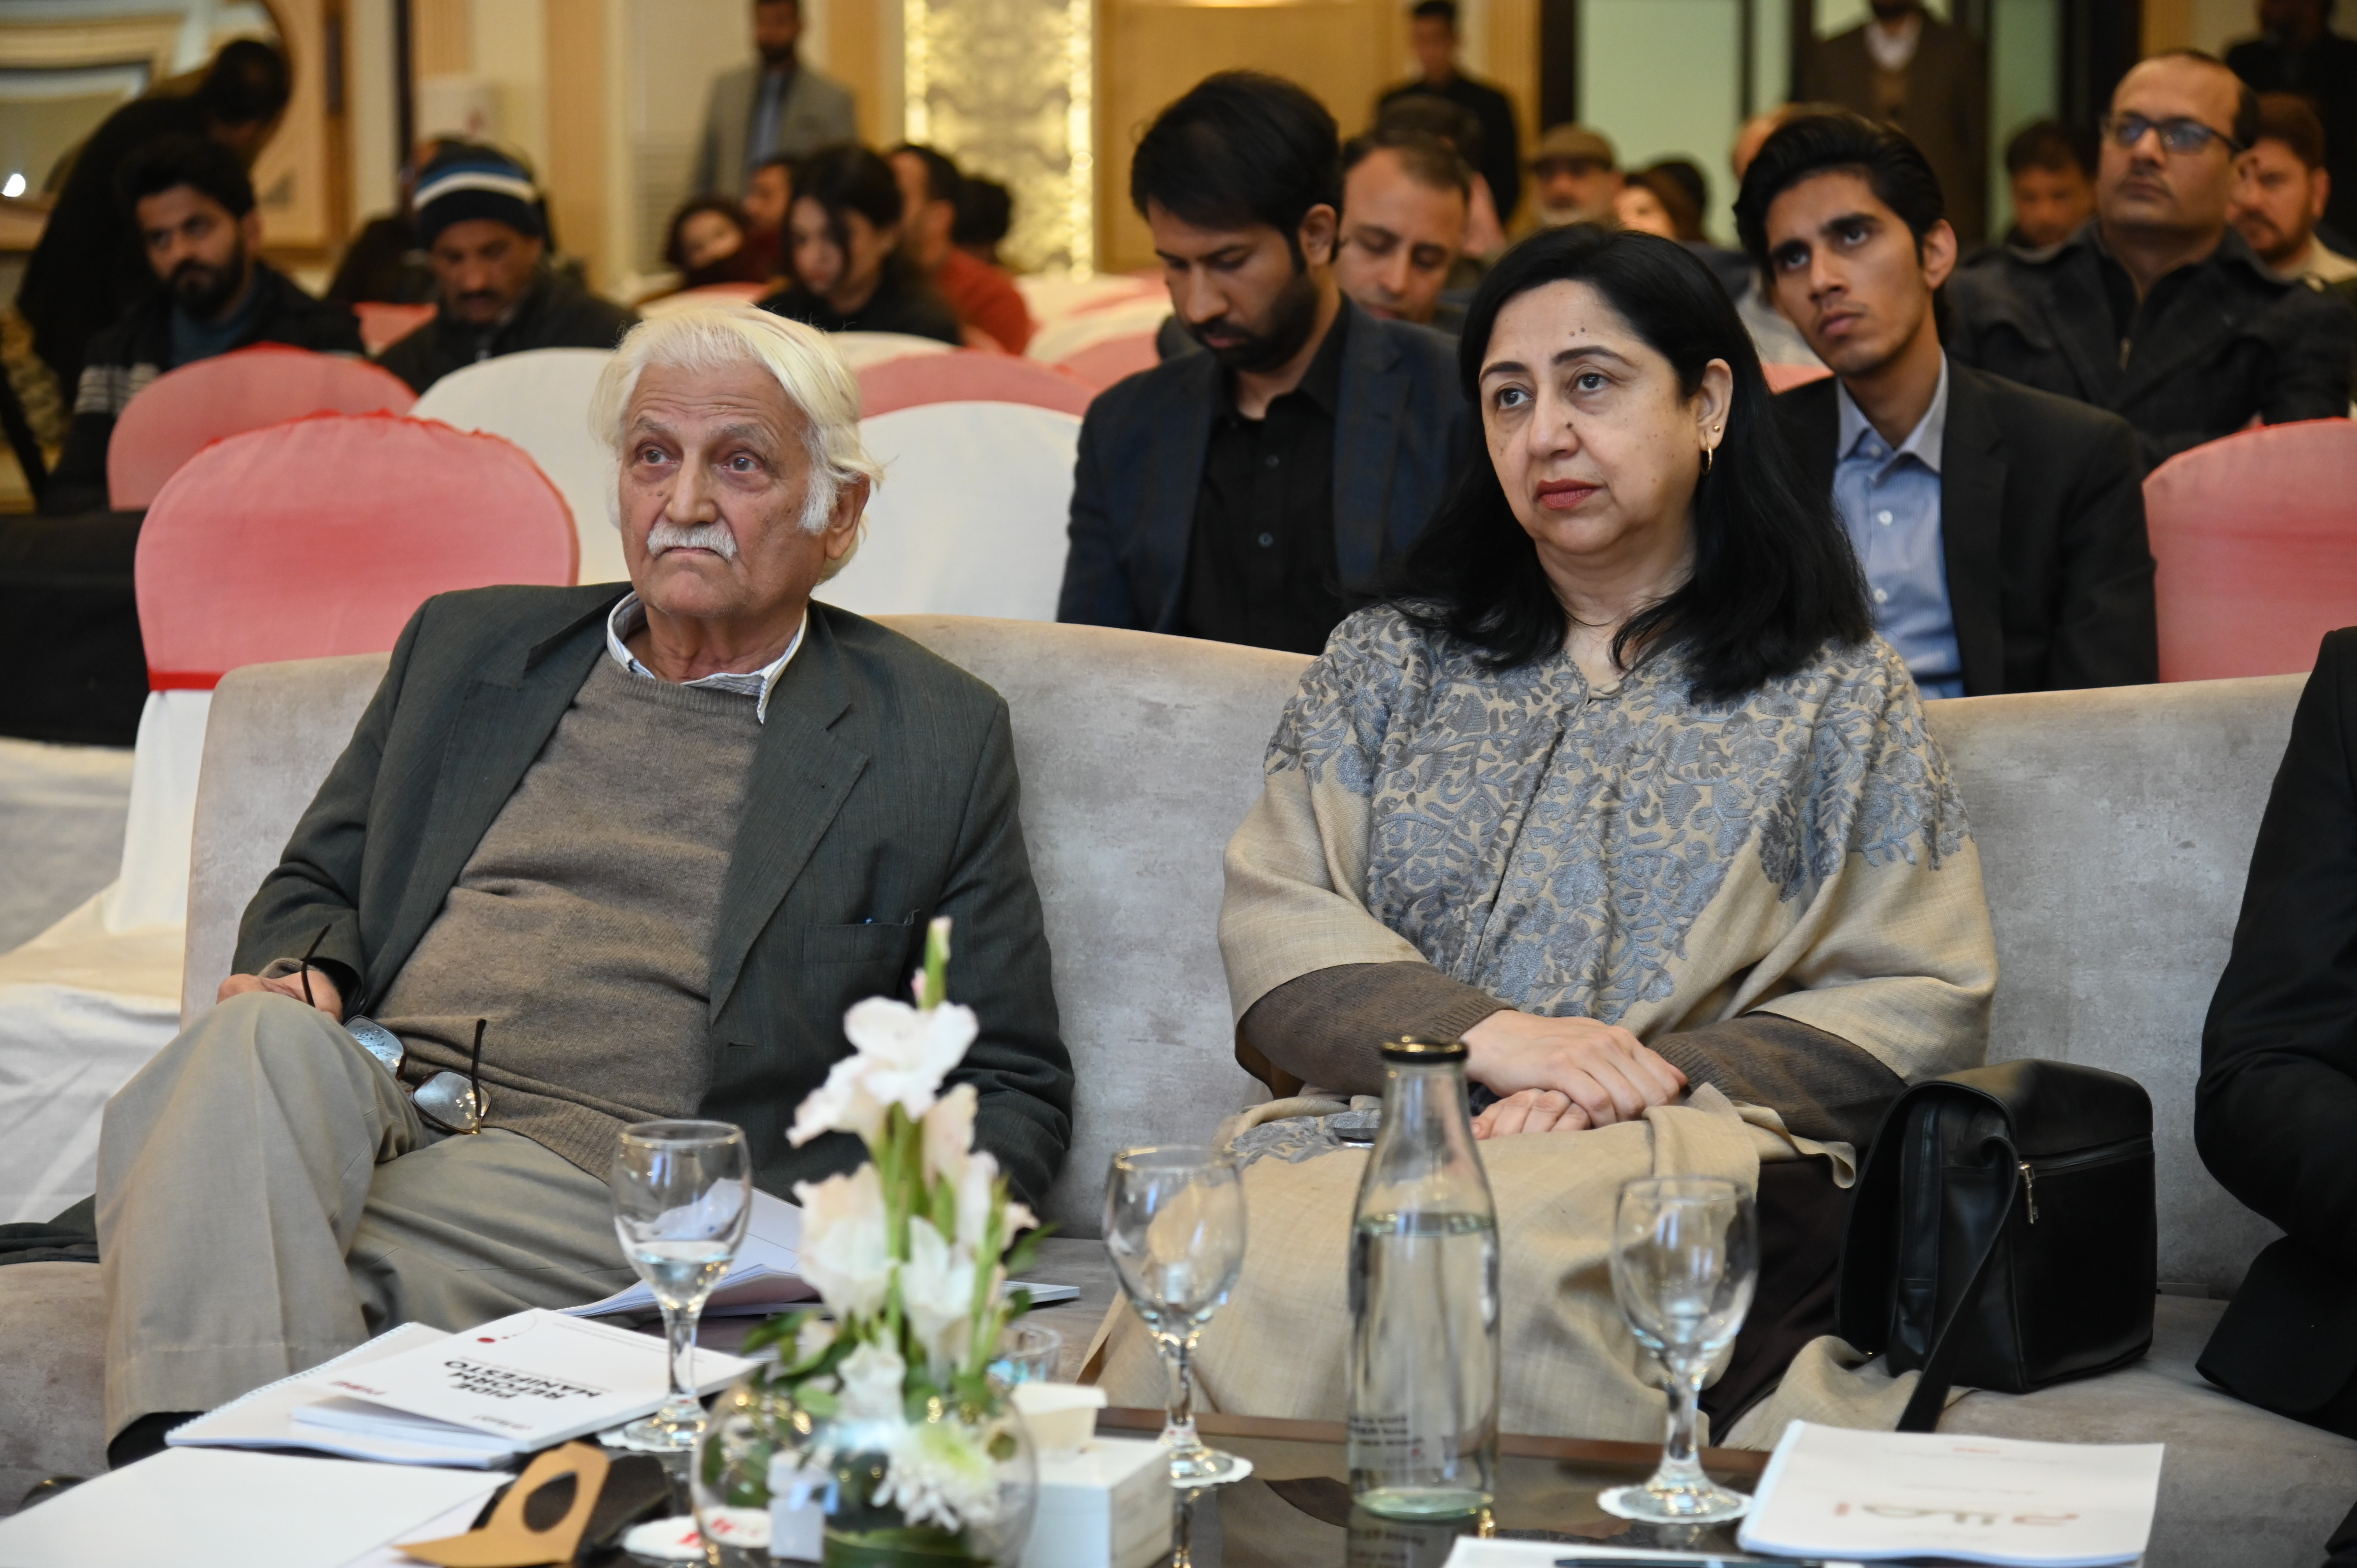 Dr Durr e Nayab, Joint Director/Pro Vice Chancellor PIDE at a conference of PIDE Reform Manifesto